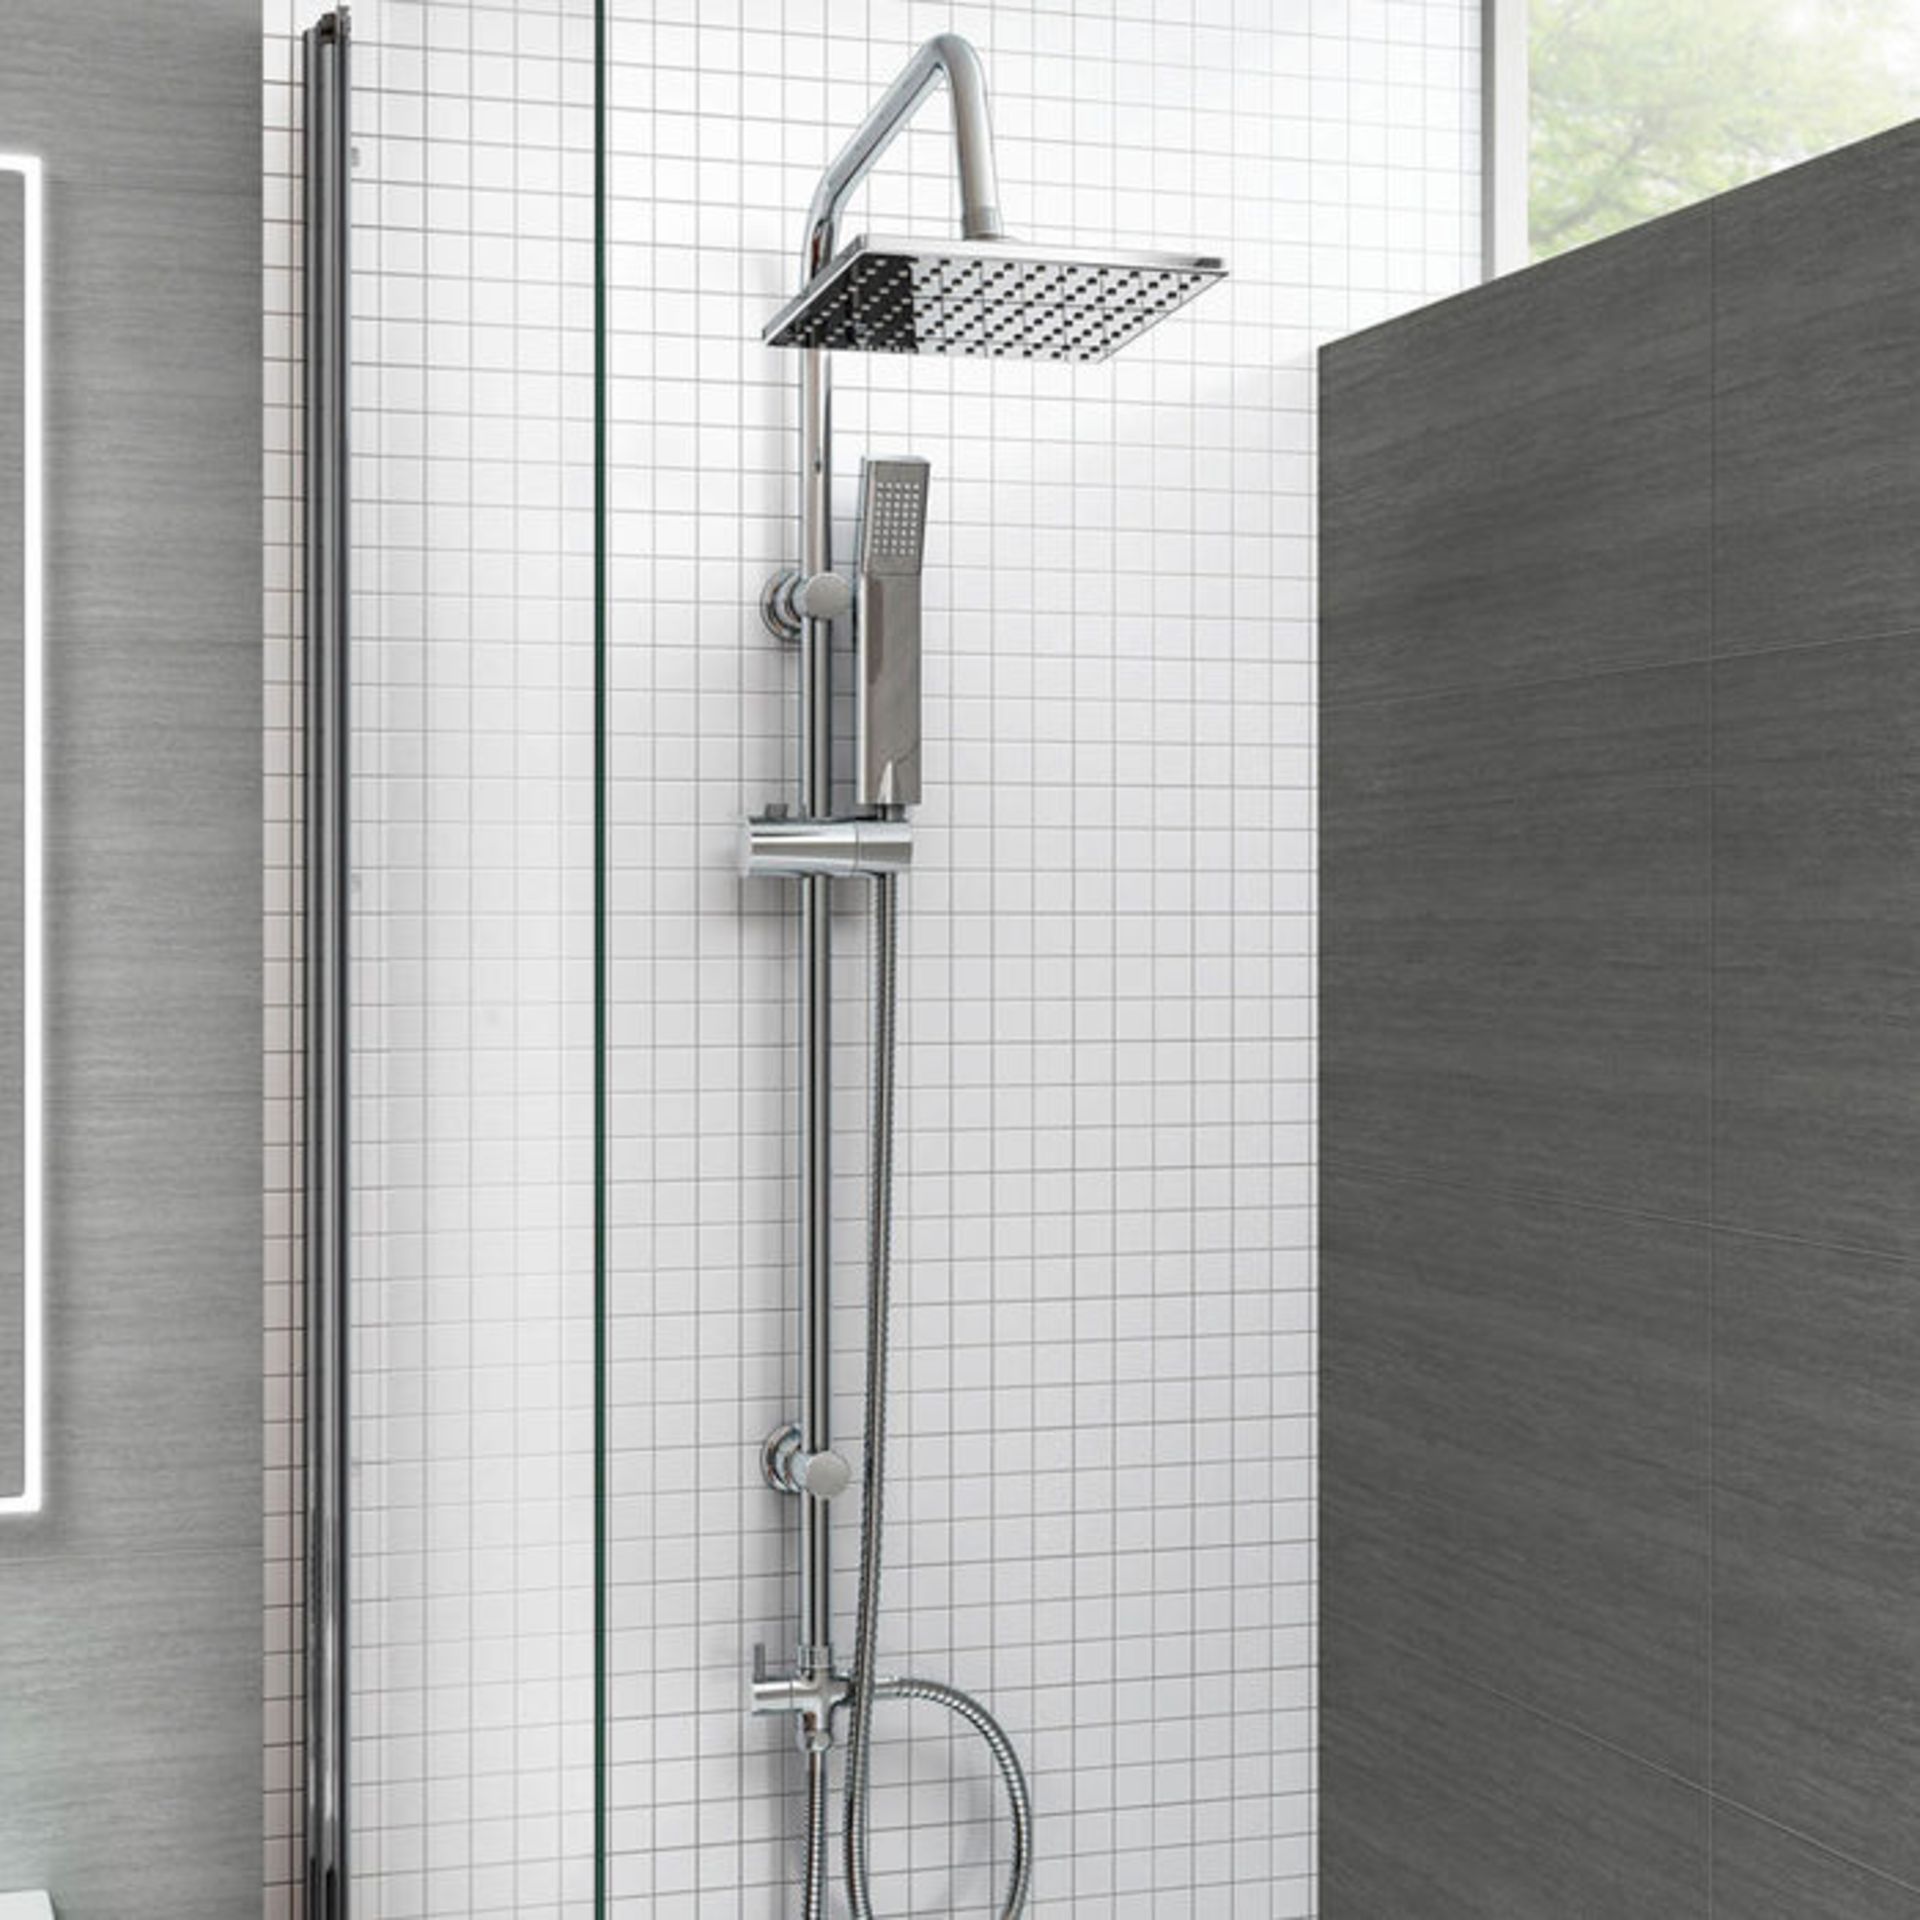 (TS213) 200mm Square Head, Riser Rail & Handheld Kit. Quality stainless steel shower head with